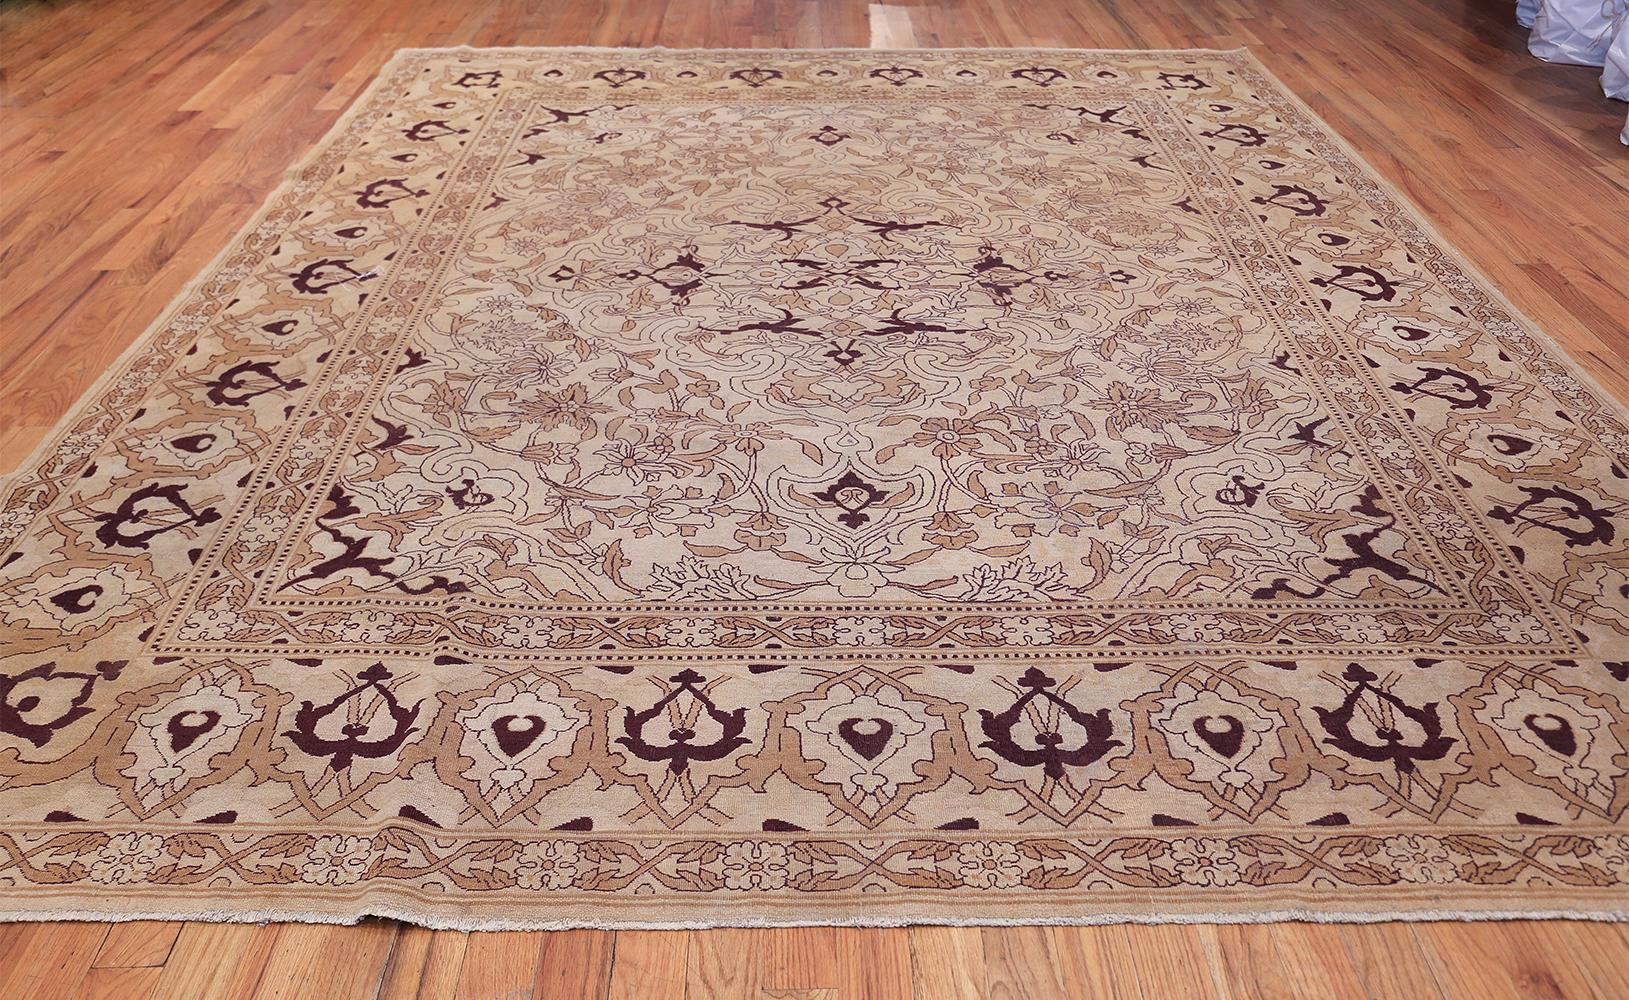 Antique Indian Amritsar rug, country of origin: India, circa 1920. Size: 9 ft 7 in x 11 ft 6 in (2.92 m x 3.51 m) 

Like many other beautiful antique Indian Amritsar rugs, this one uses simple colors in a contrasting palette to convey more